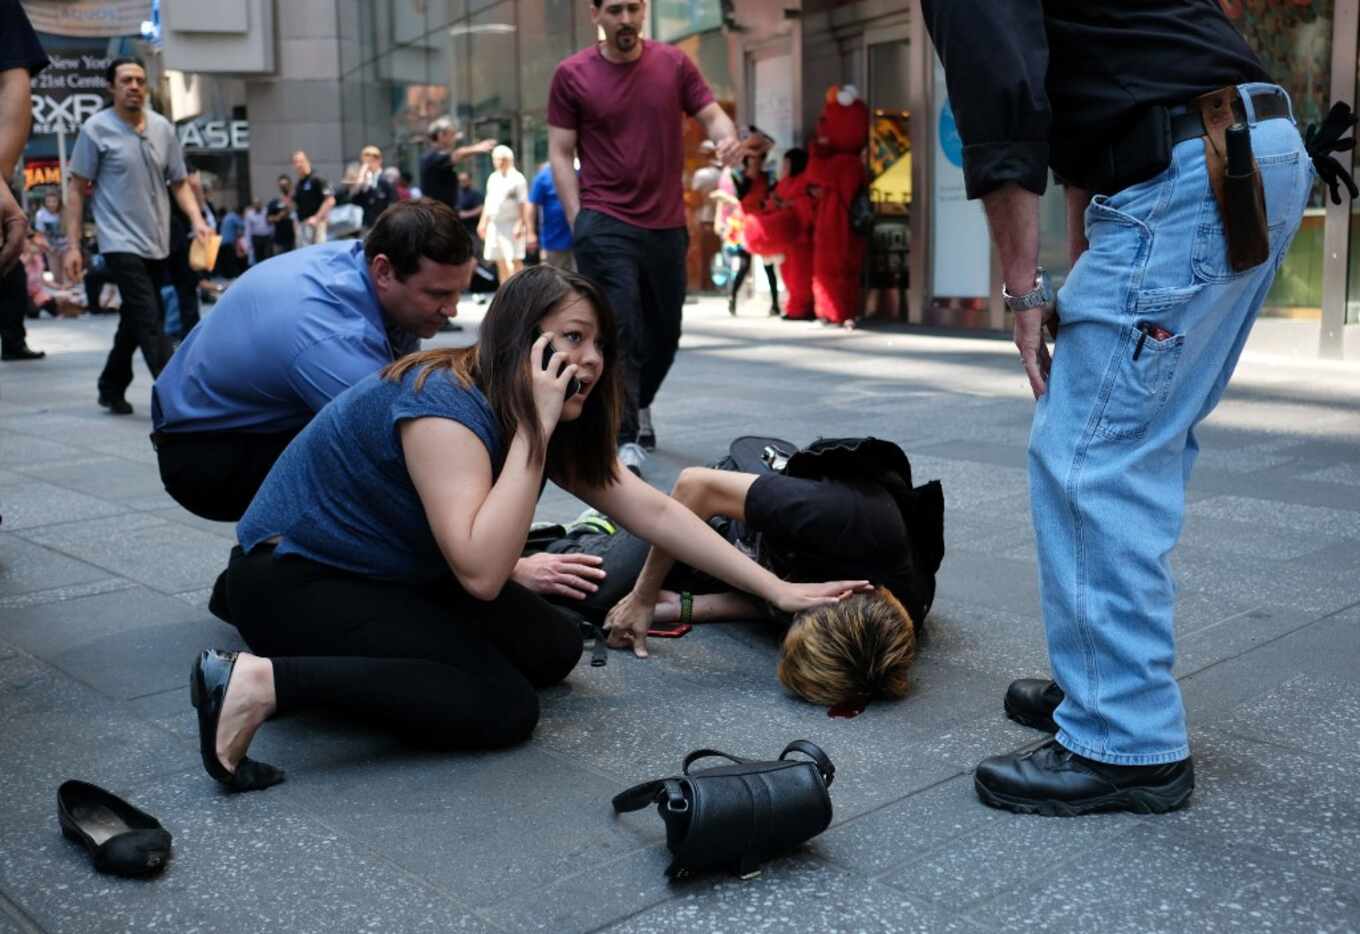 People attend to an injured man after a car hit him in Times Square.